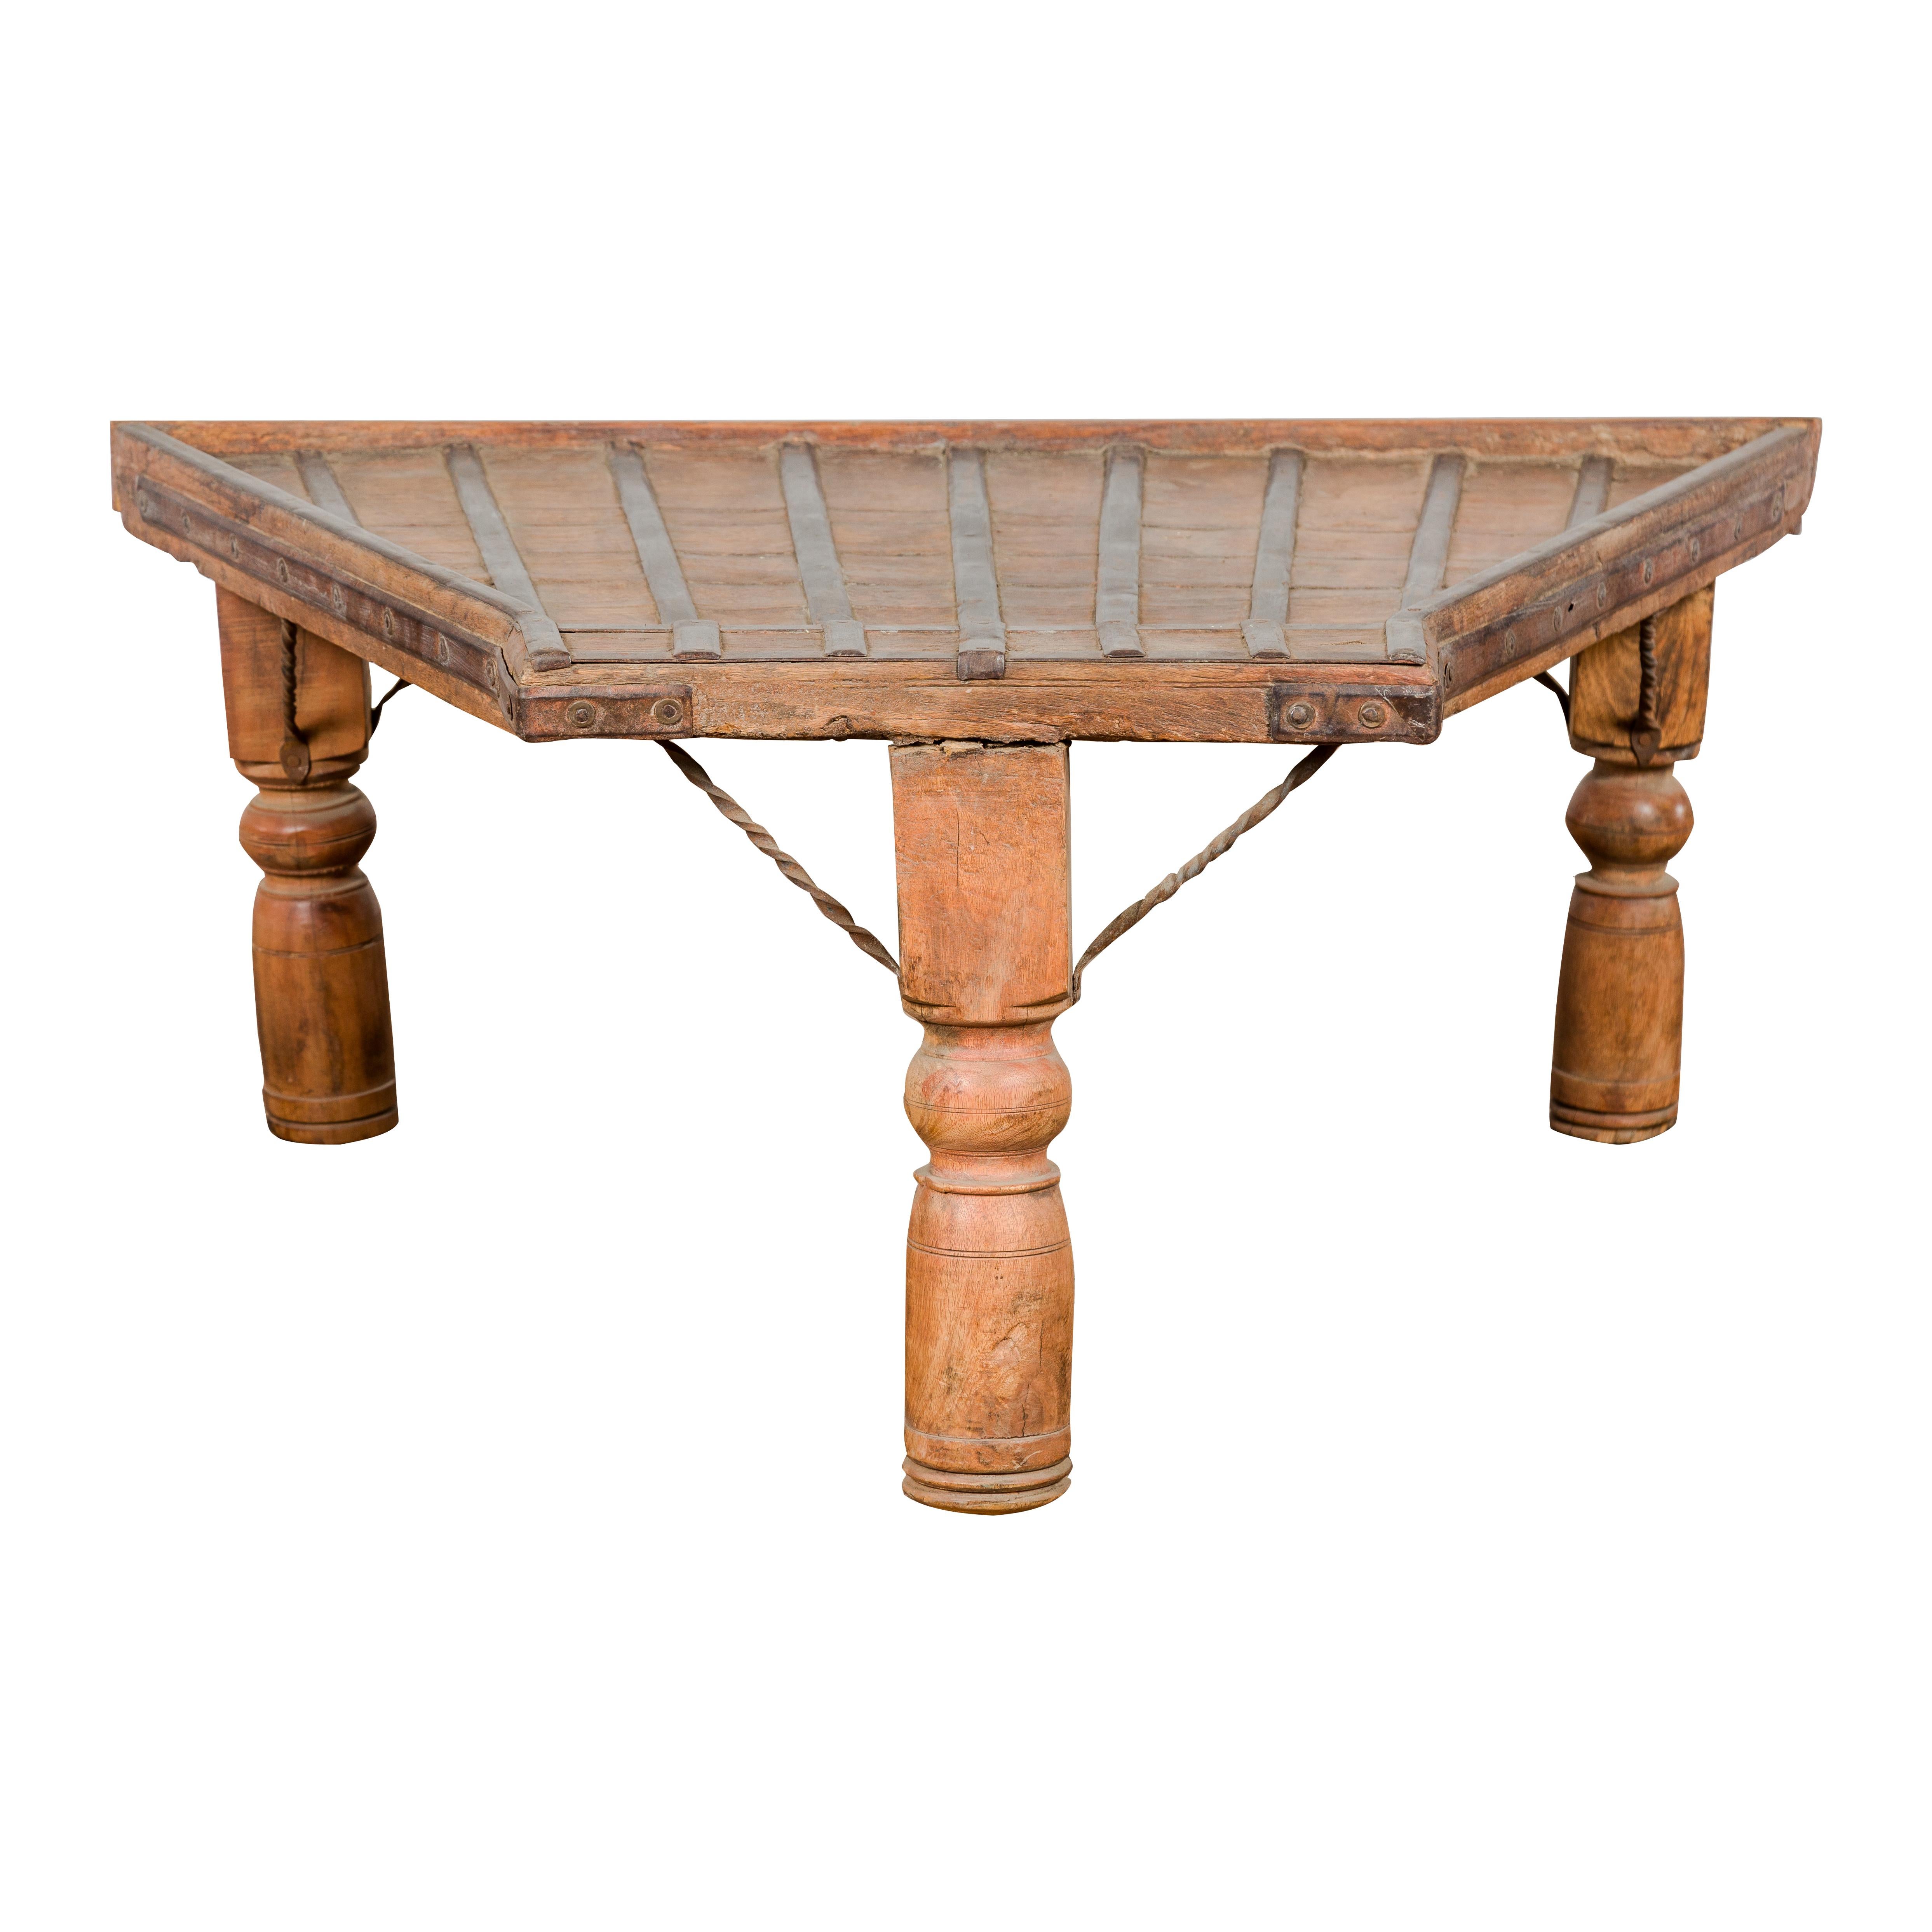 19th Century Bullock Cart Rustic Coffee Table with Twisted Iron Stretchers For Sale 11